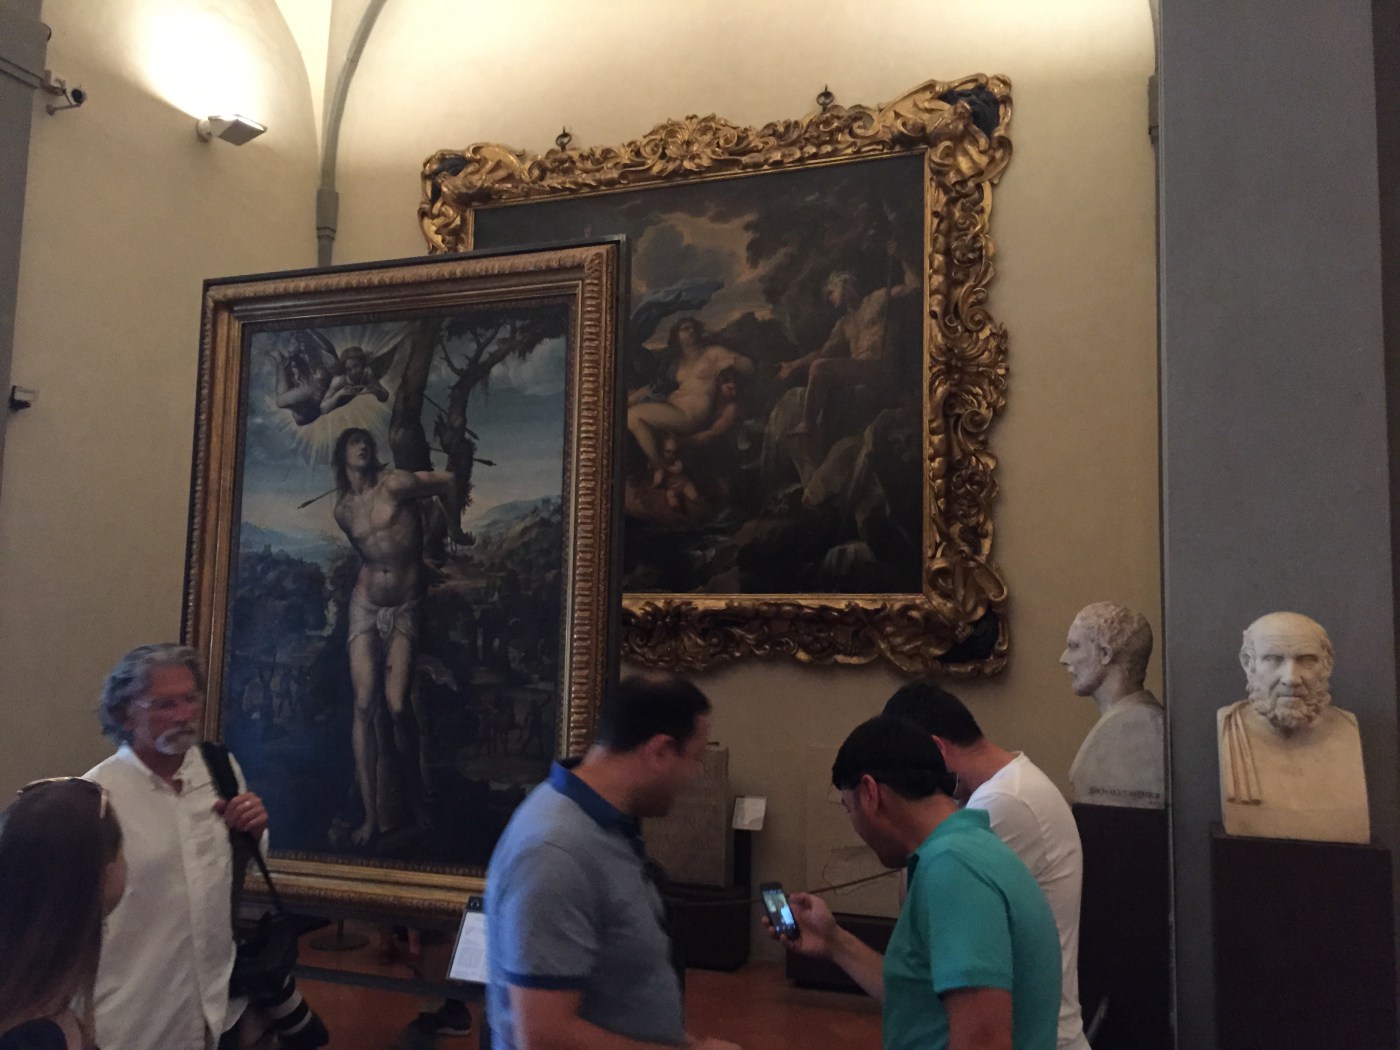 The Gallery setup in the Uffizzi gallery